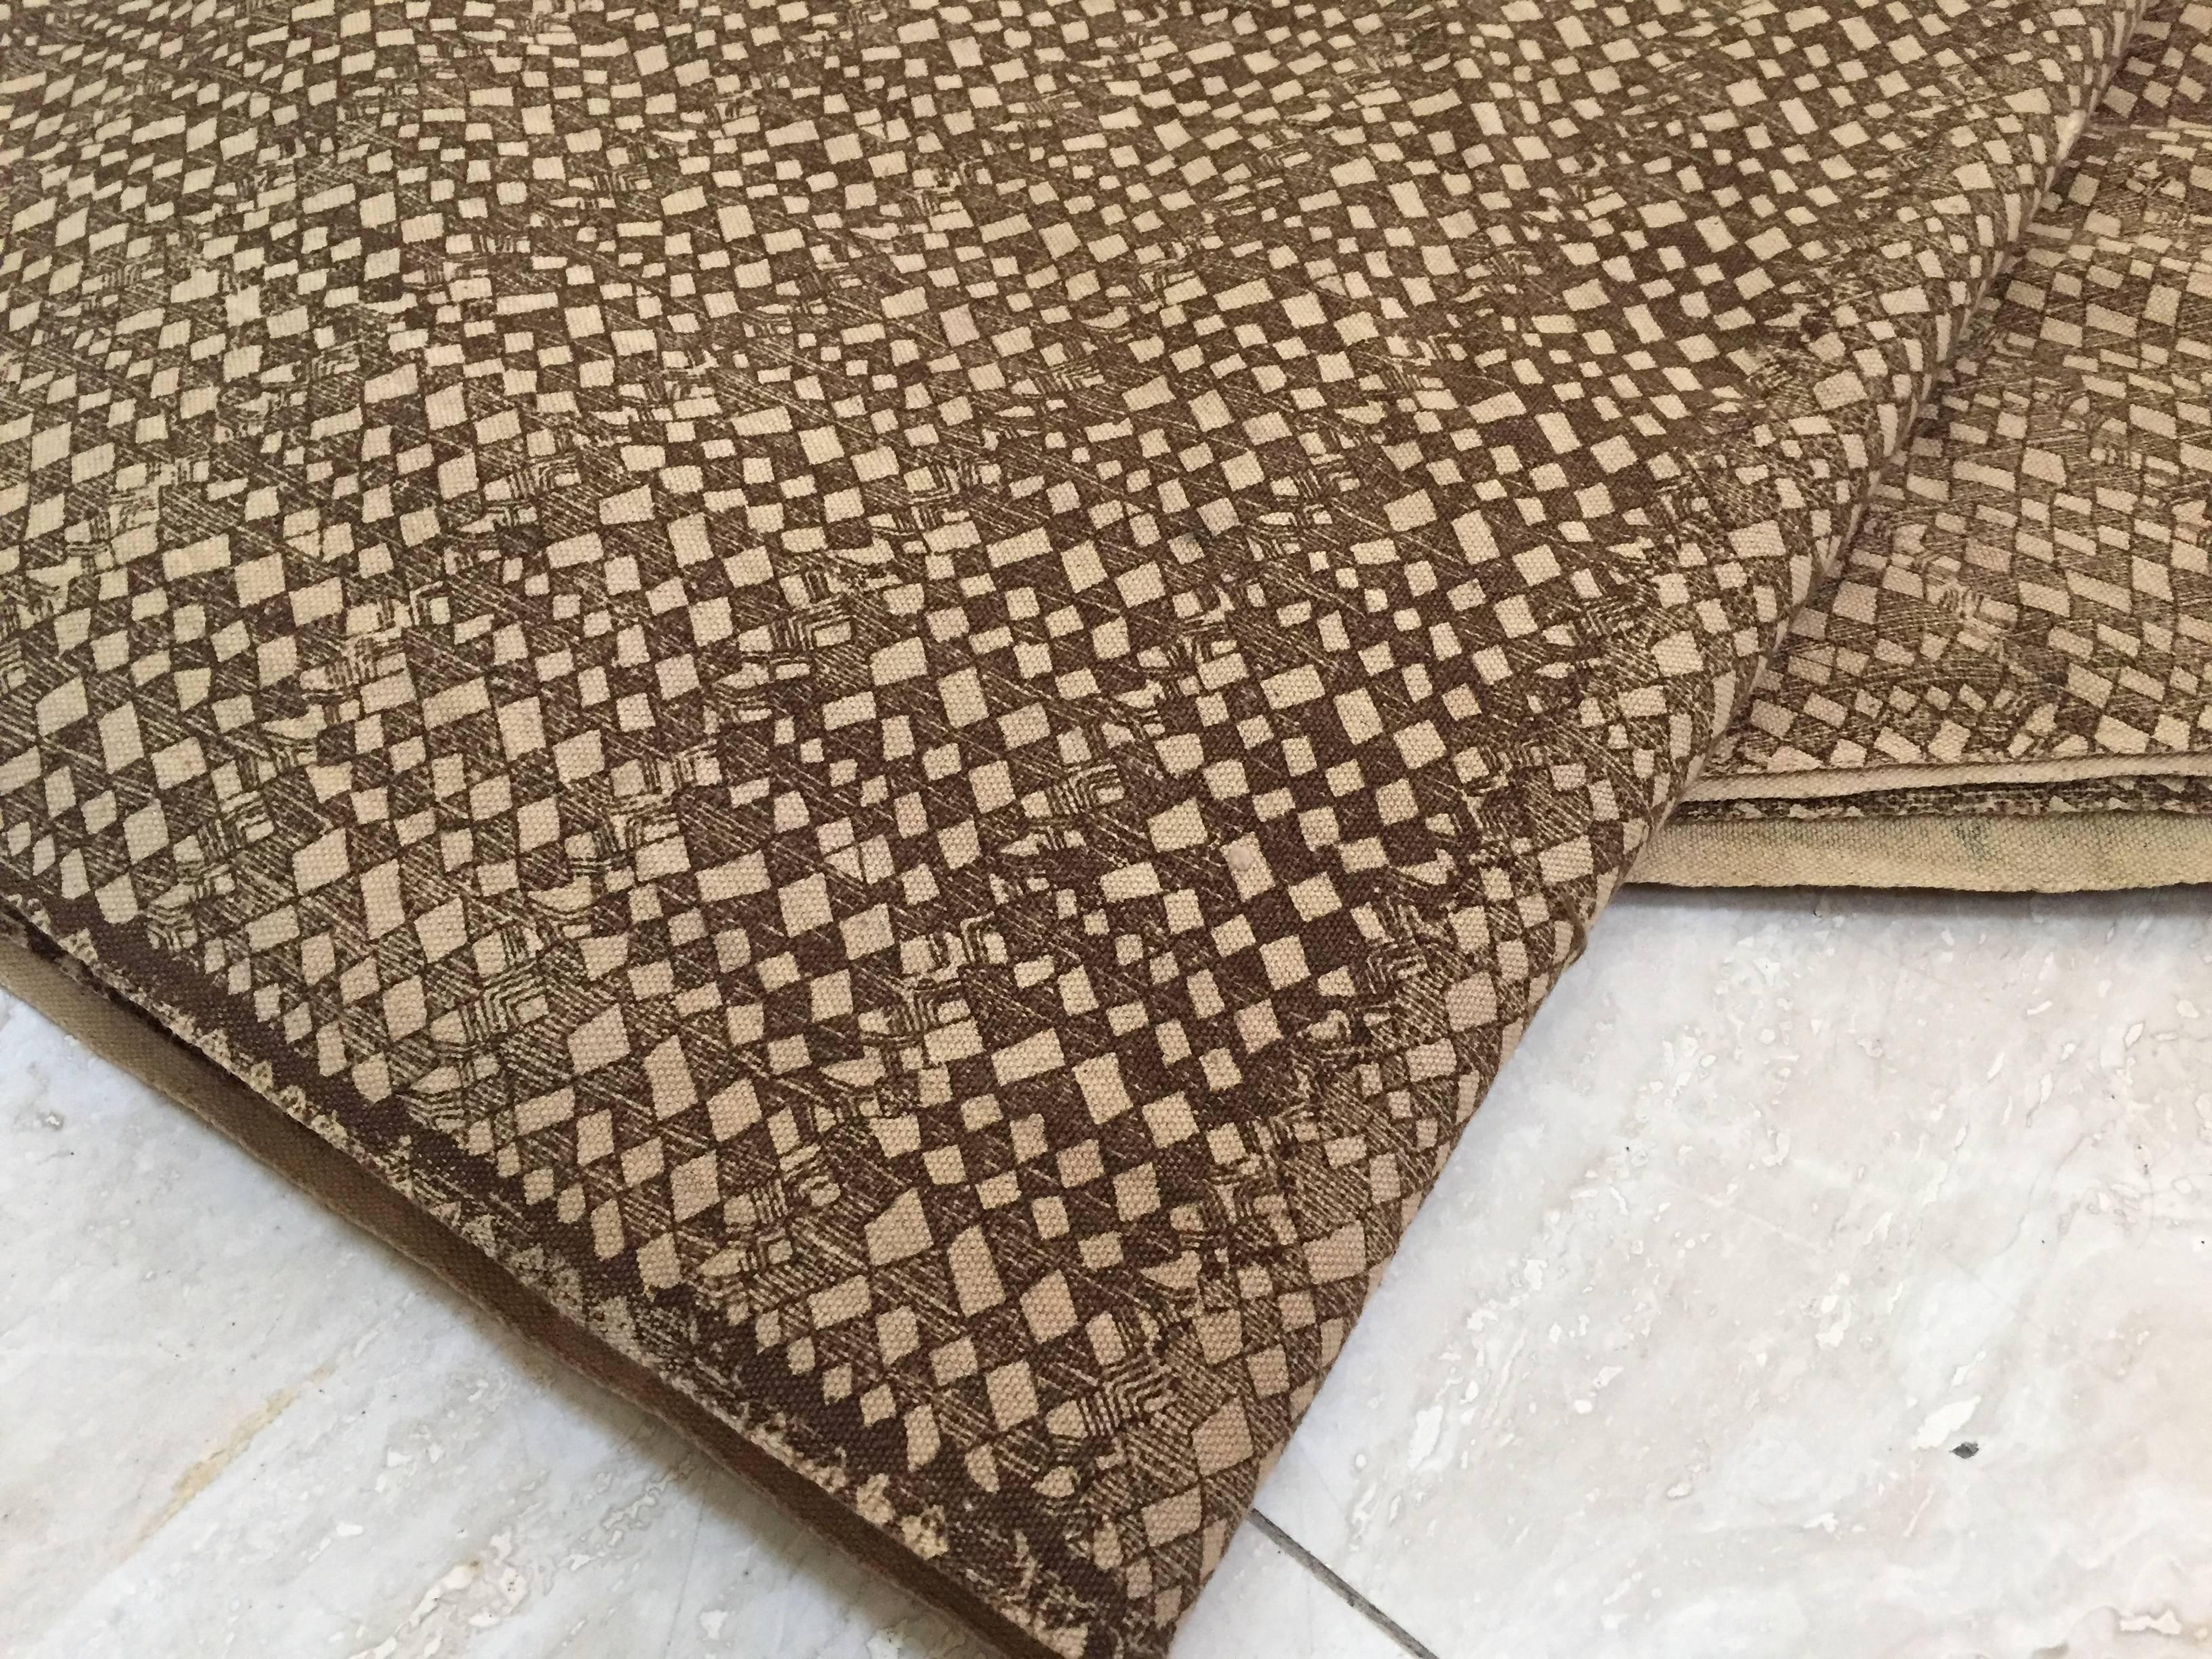 Handwoven Bogolan mud cloth textile from Mali, Africa, Bambara.
It is a handwoven tribal cotton fabric traditionally dyed with fermented mud.
Woven African textile, with geometric tribal designs, earth colors in browns.
100% organic cotton.
Long